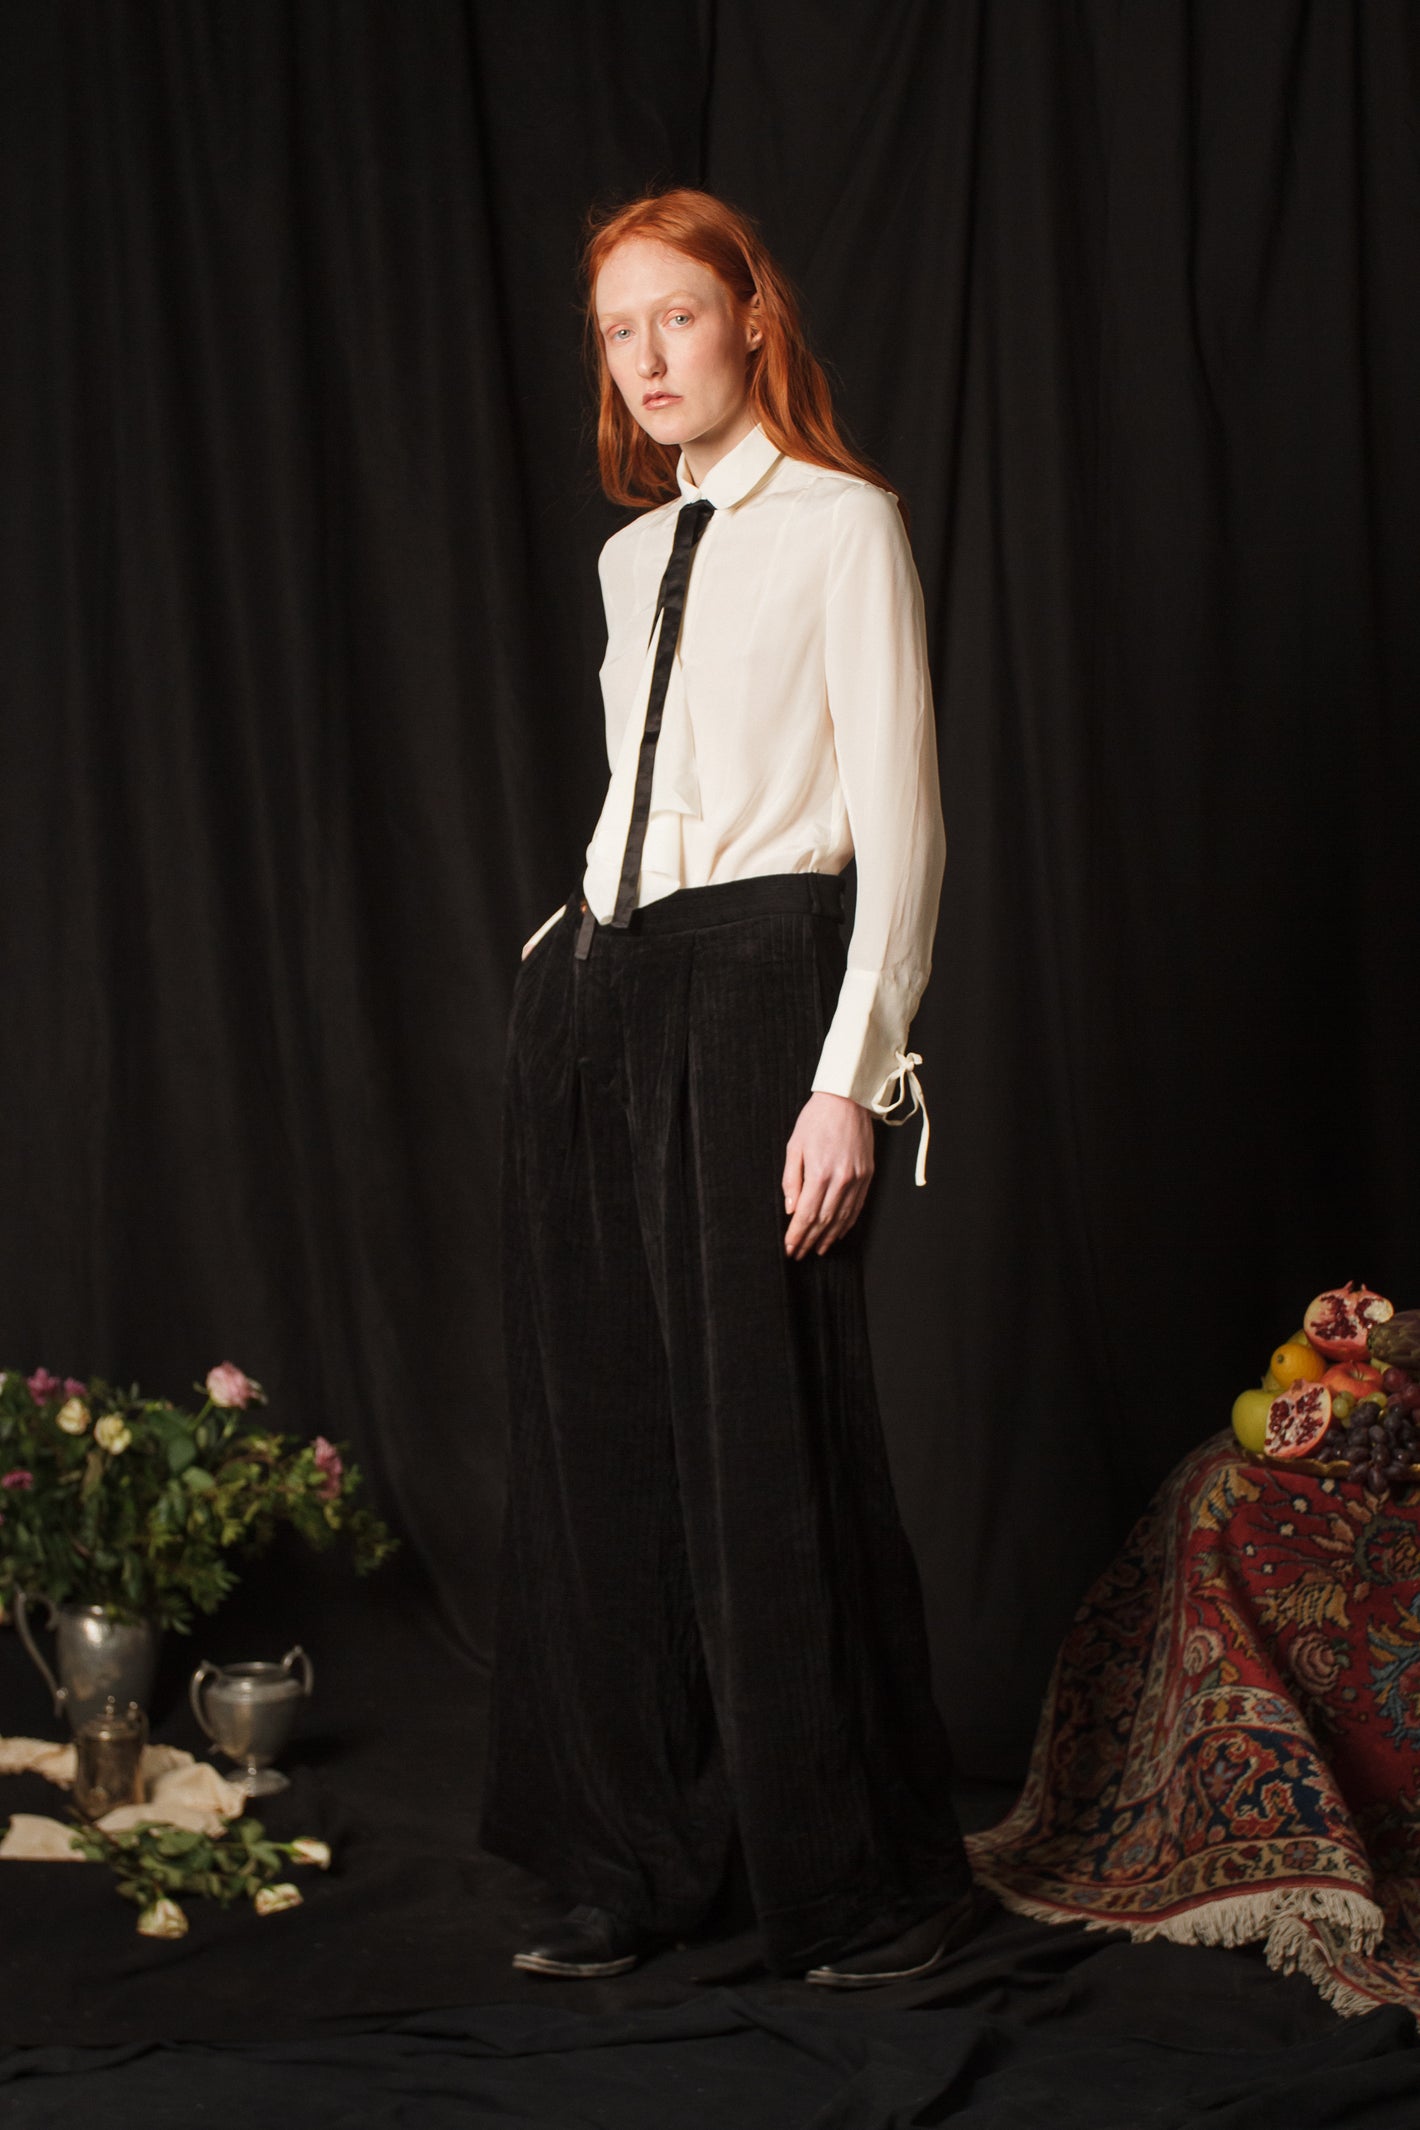 A Tentative Atelier AW18 Lookbook Womens white shirt blouse with black ribbon tie styled with black velvet trousers